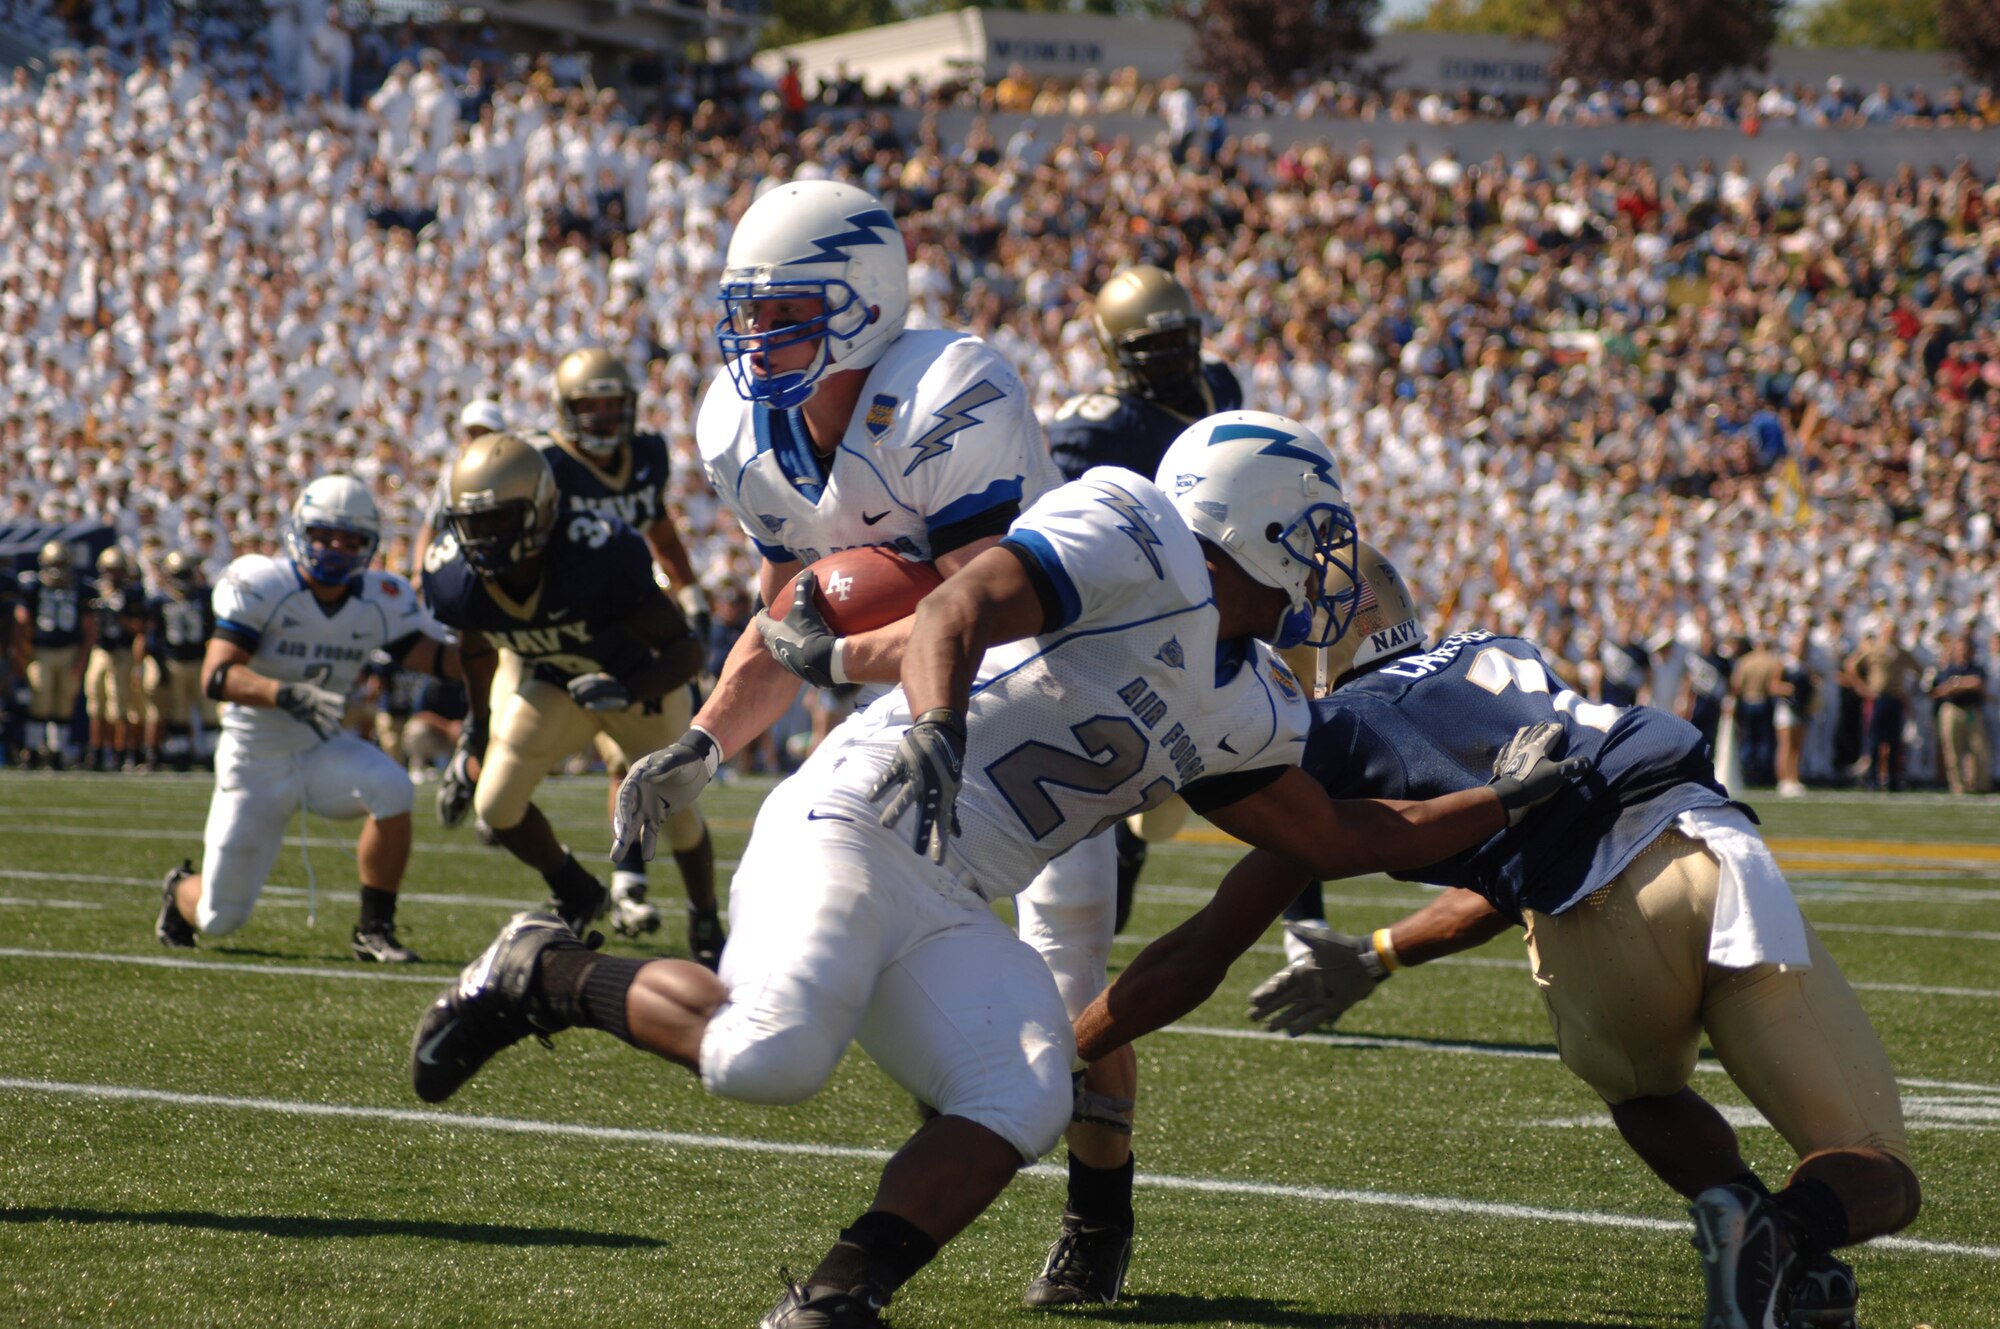 U.S. Air Force Academy Falcon tailback Kip McCarthy eyes extra yardage while fullback Ryan Williams attempts to block Navy safety Blake Carter during Air Force's 31-20 loss to the Midshipmen Sept. 29 at Annapolis, Md. The Falcons gained 237 yards on the ground. (U.S. Air Force photo/Capt. Jillian Torango) 


